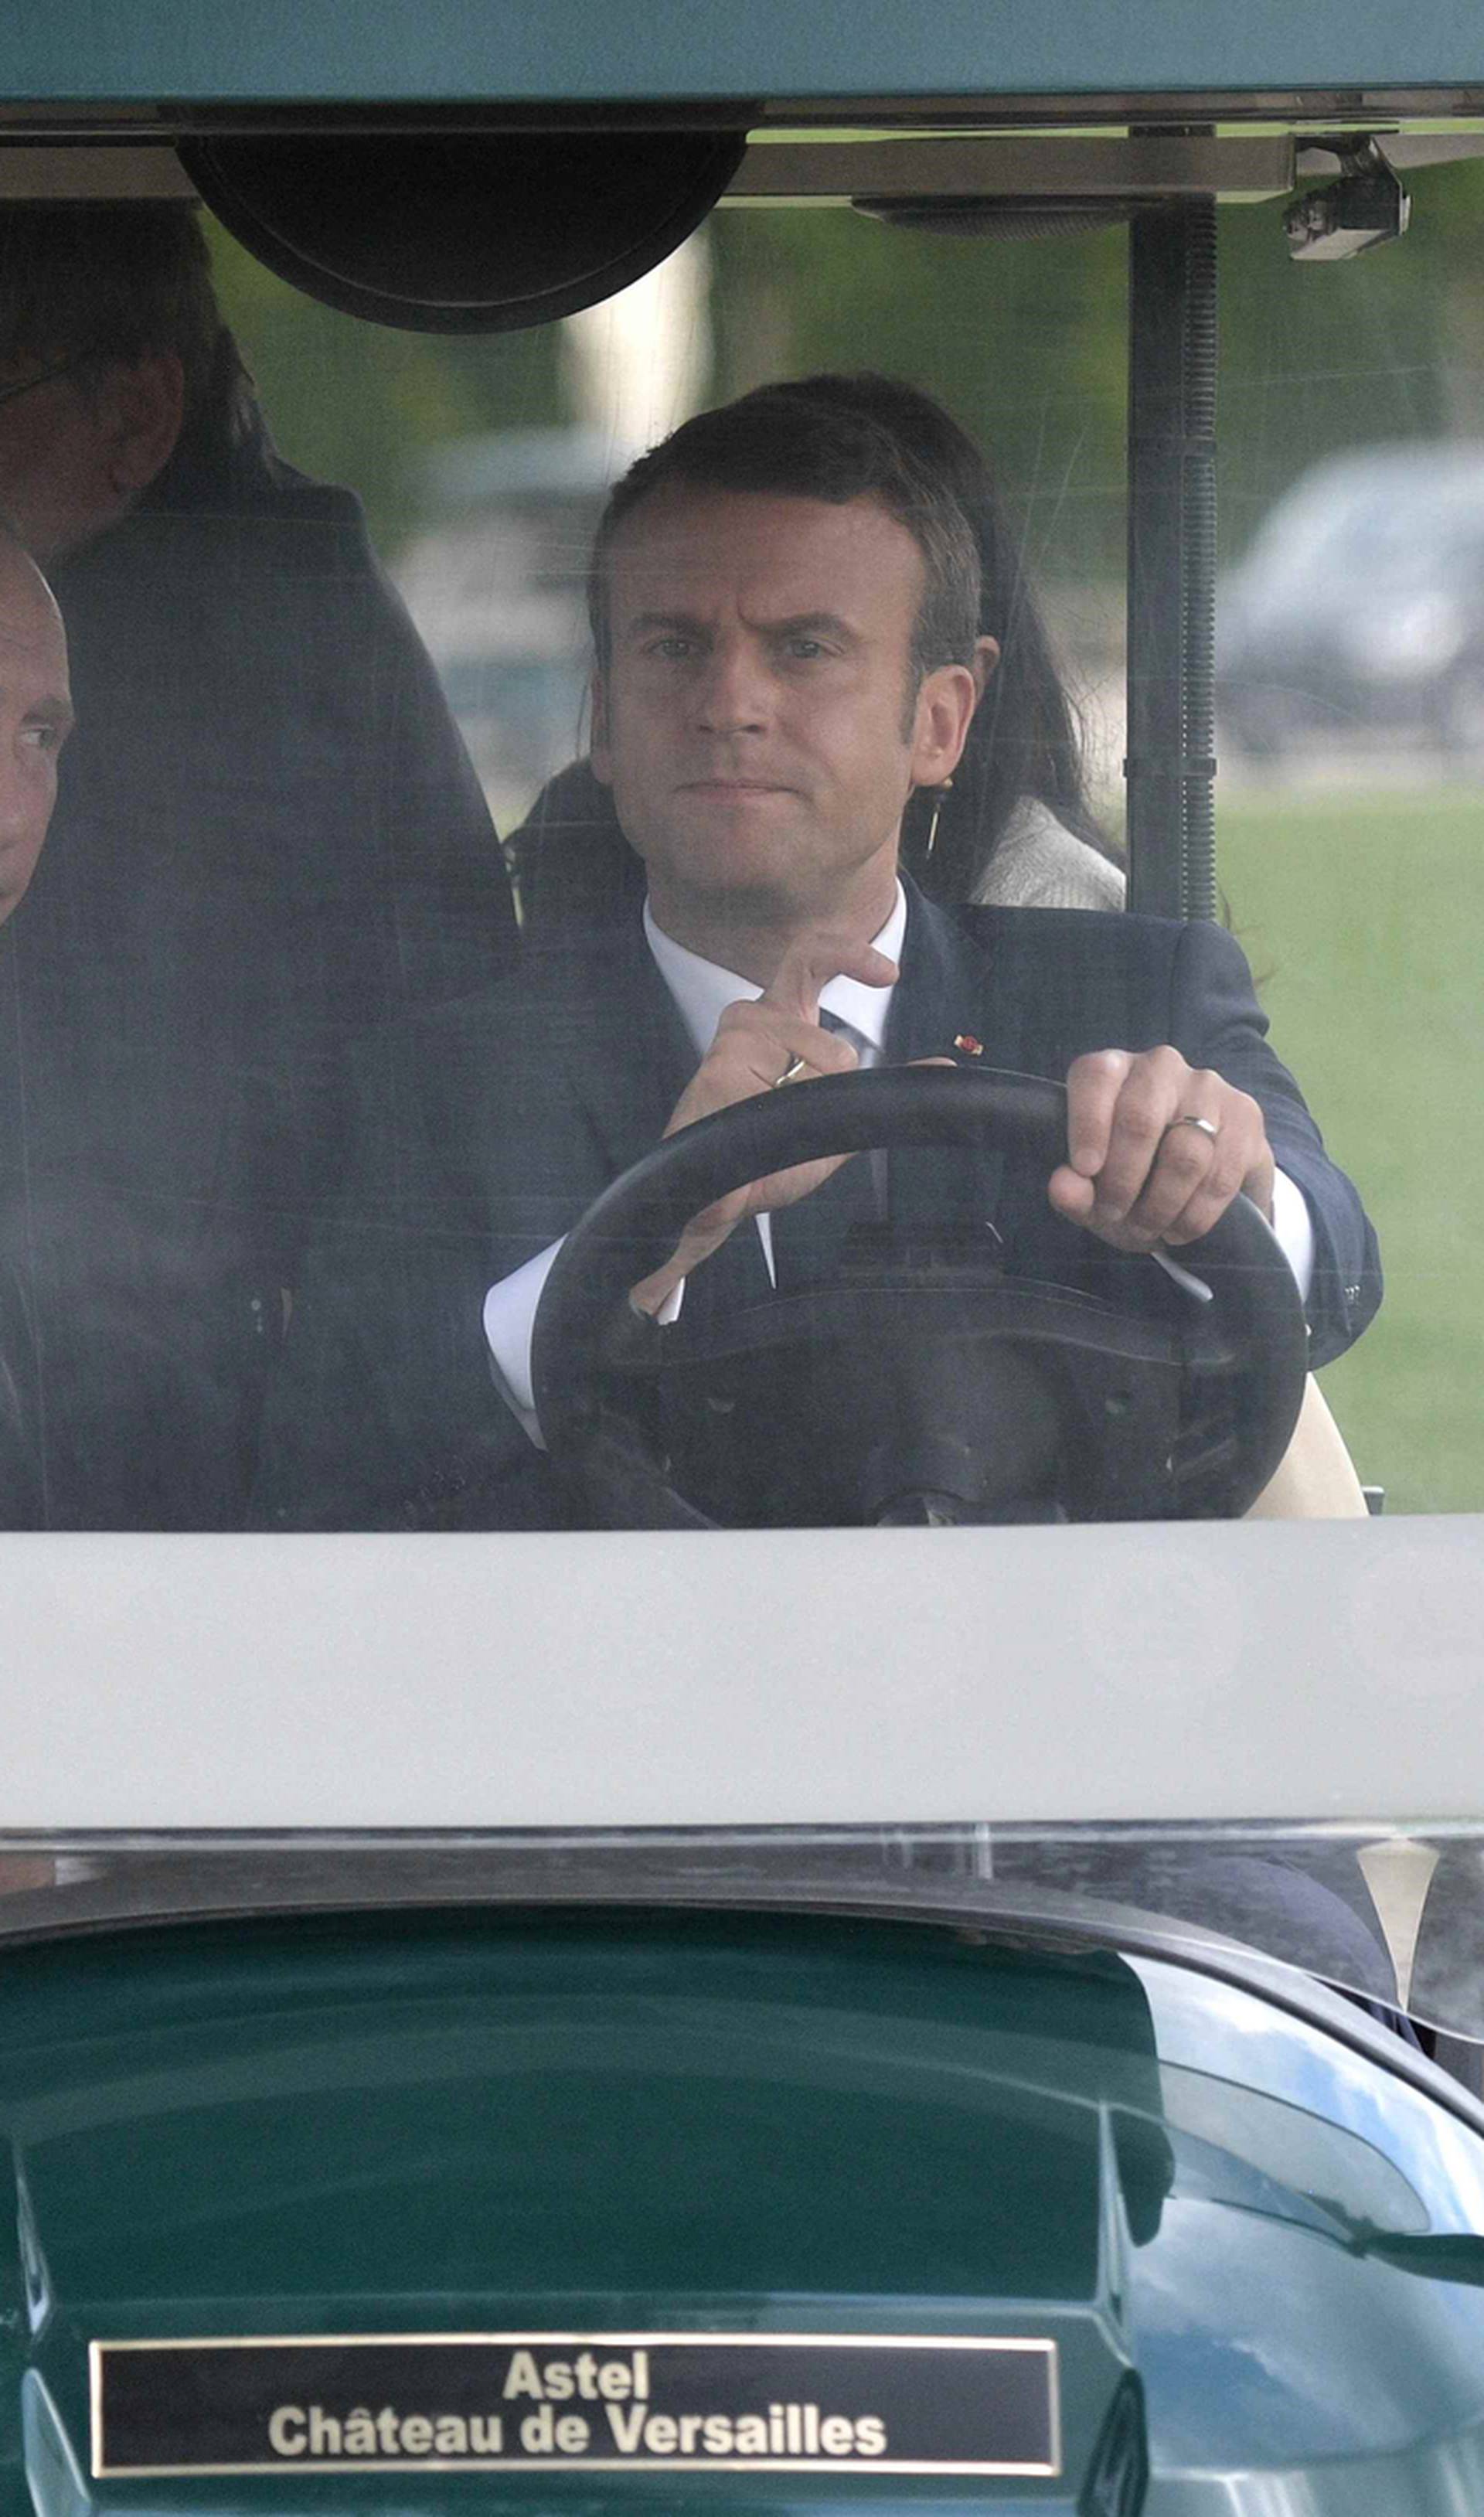 French President Macron and Russian President Putin drive an electric golf car in the gardens of the Chateau de Versailles near Paris